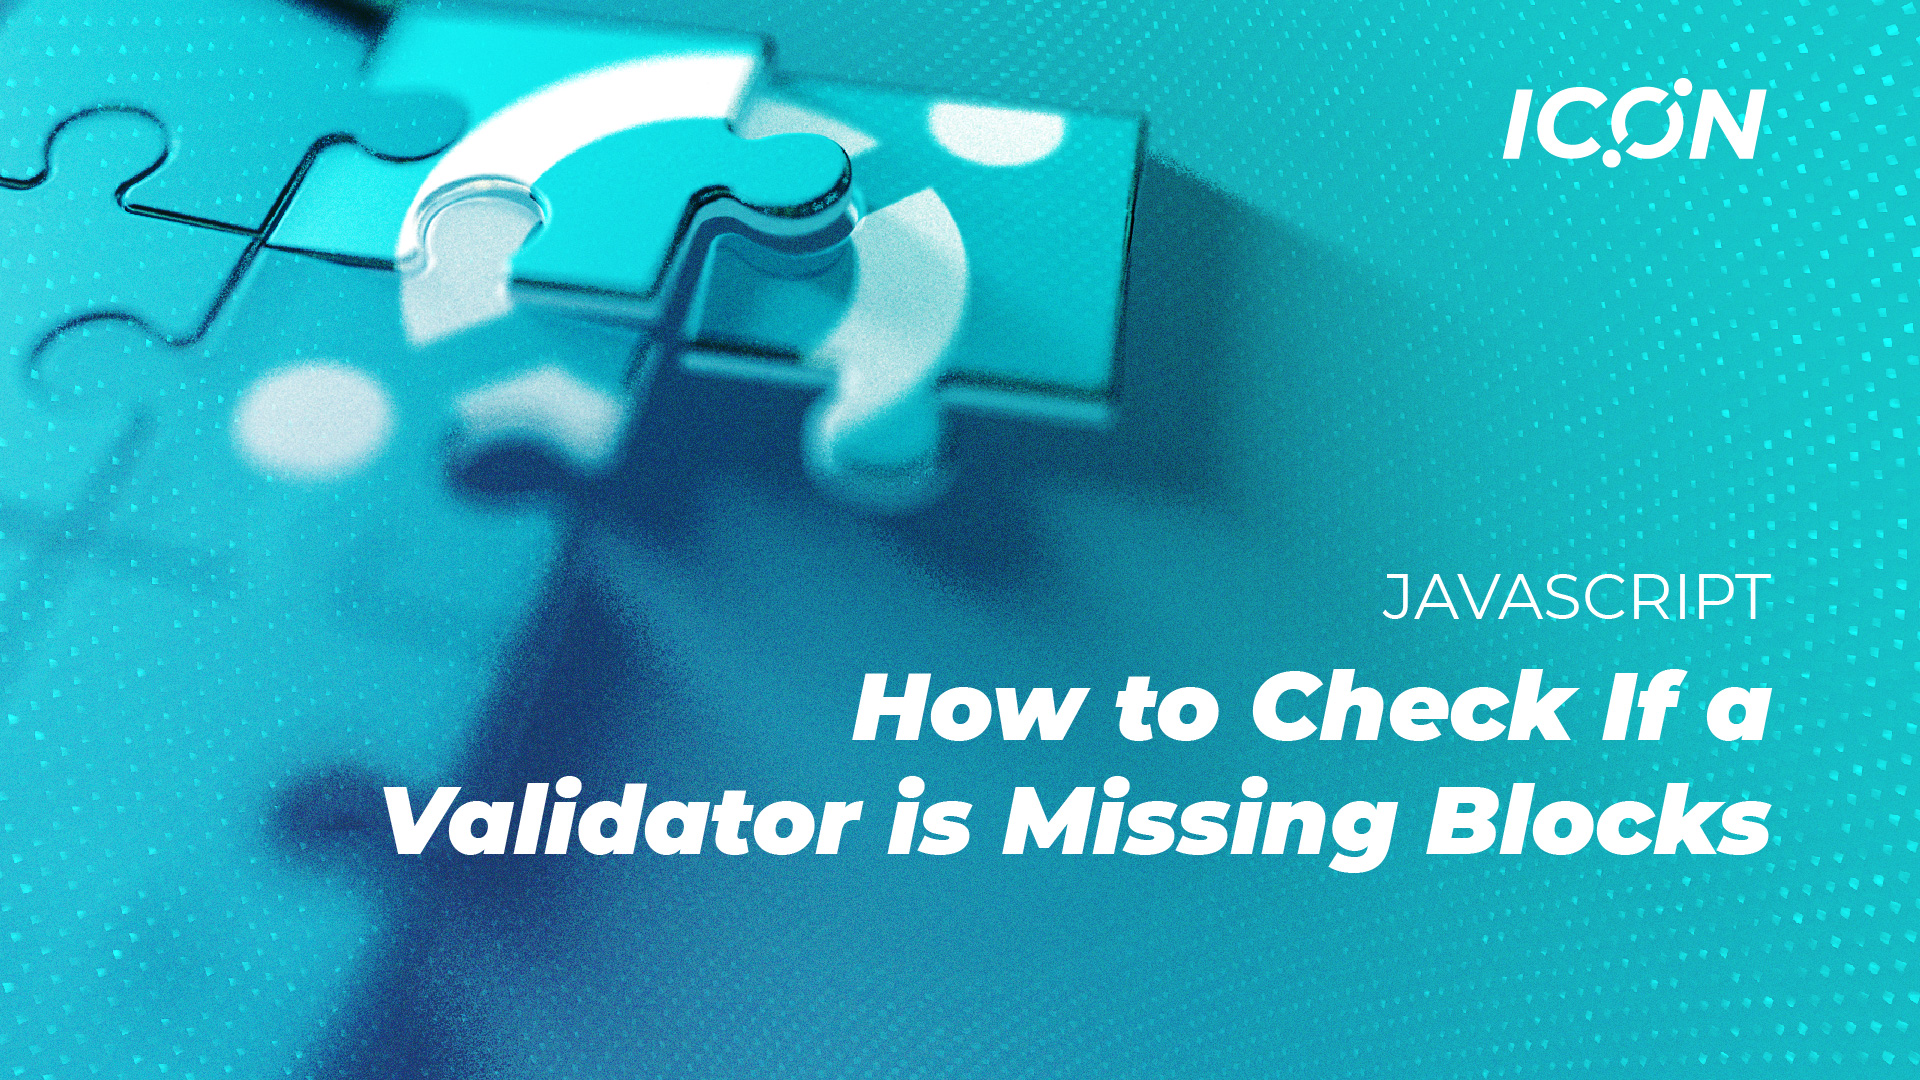 Learn how to check if a validator is missing blocks consecutively.